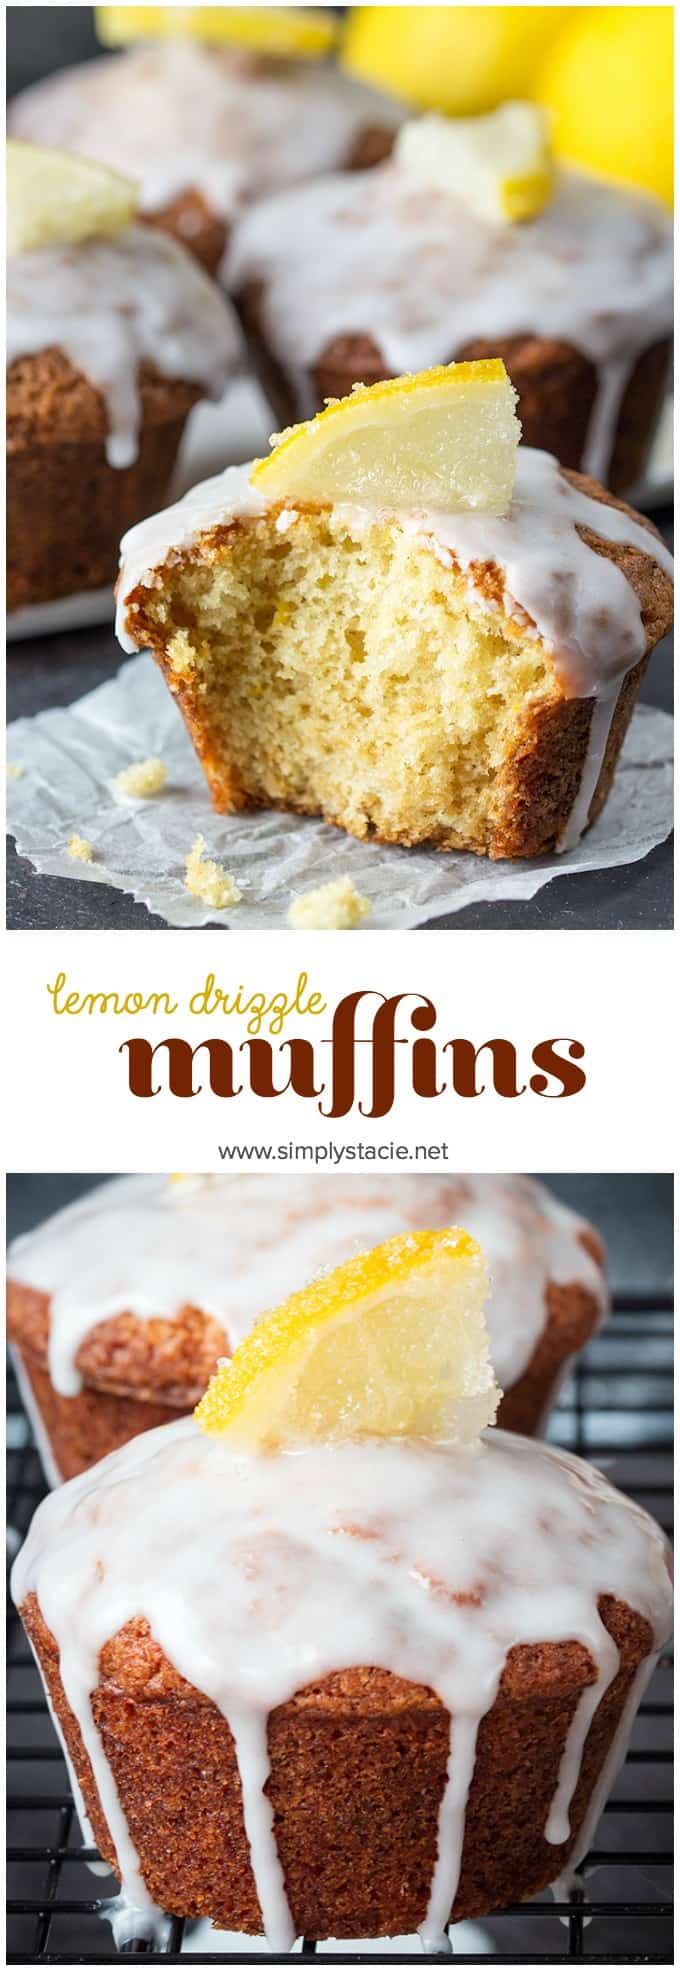 Lemon Drizzle Muffins - Zesty lemon muffins, topped with a lemon glaze and finished off with little slices of sugared lemons. Yum!